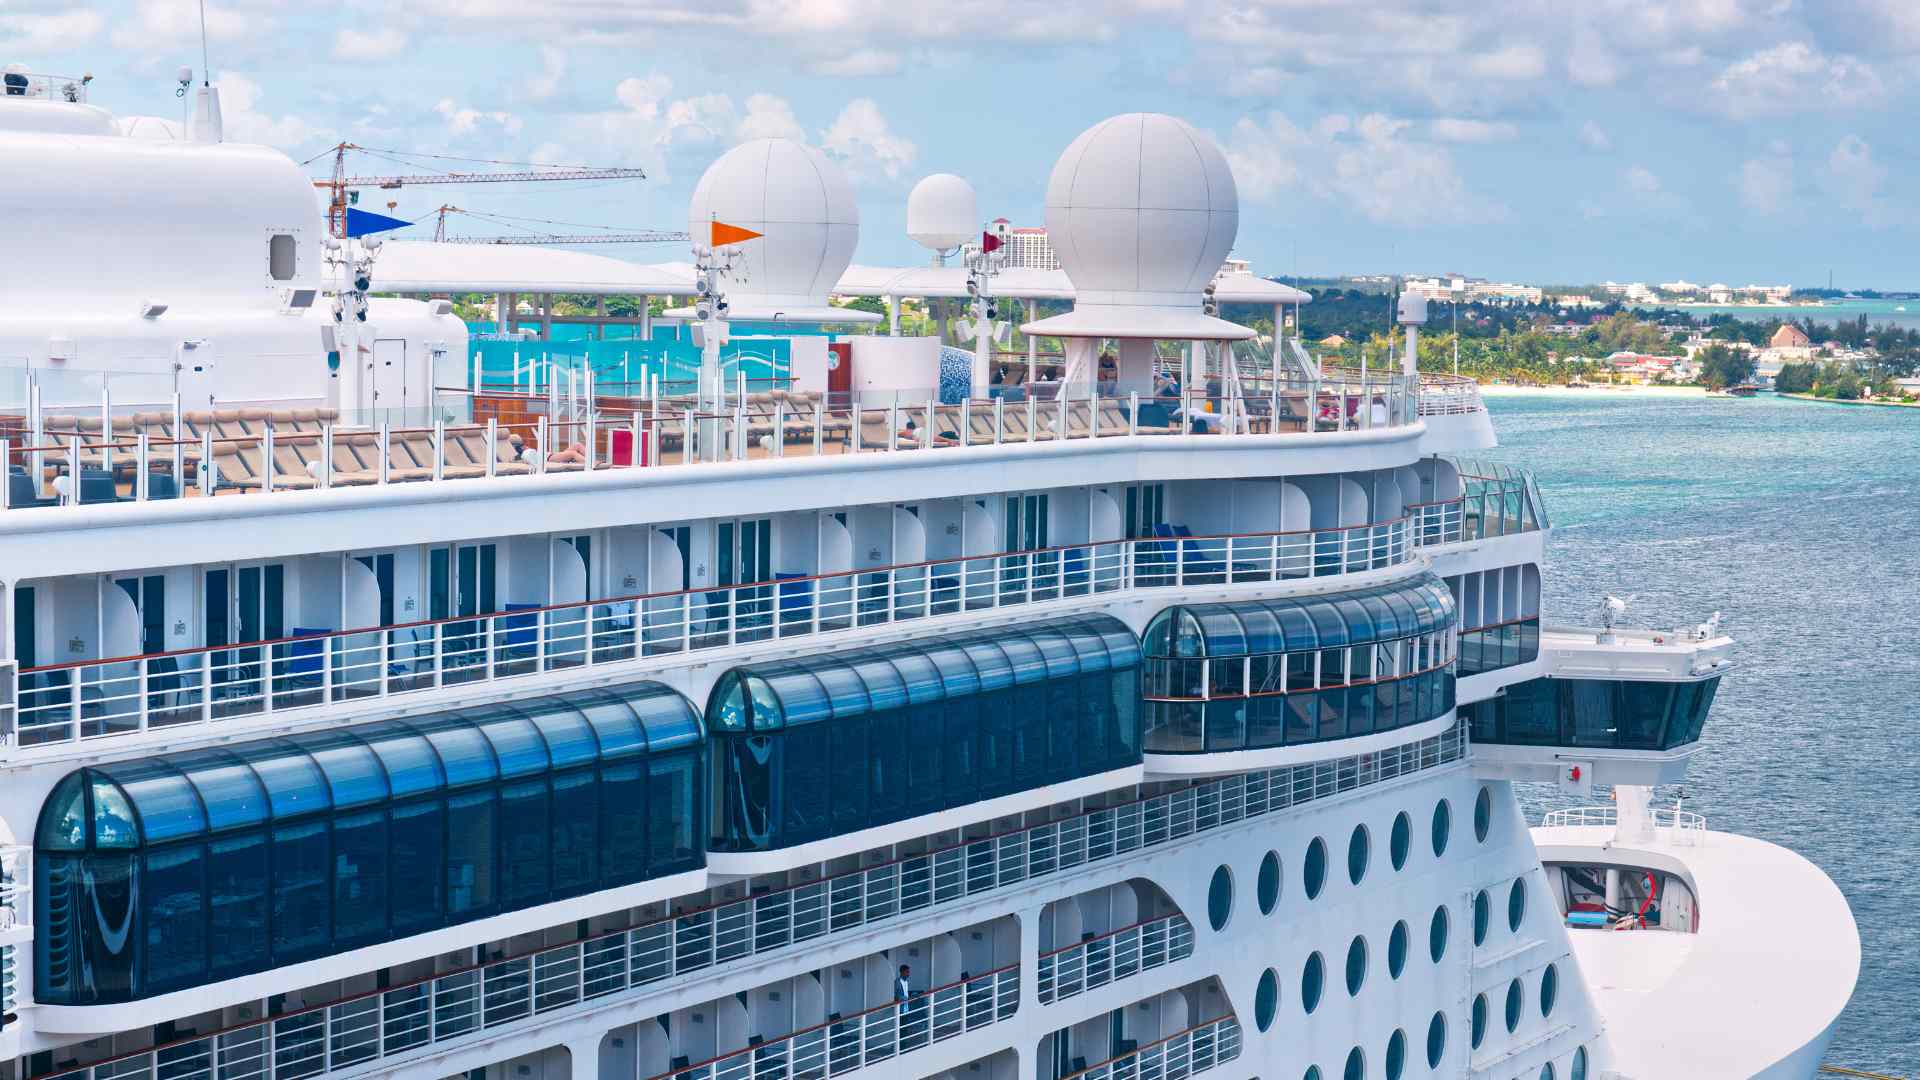 Making the Most of Your December Cruise